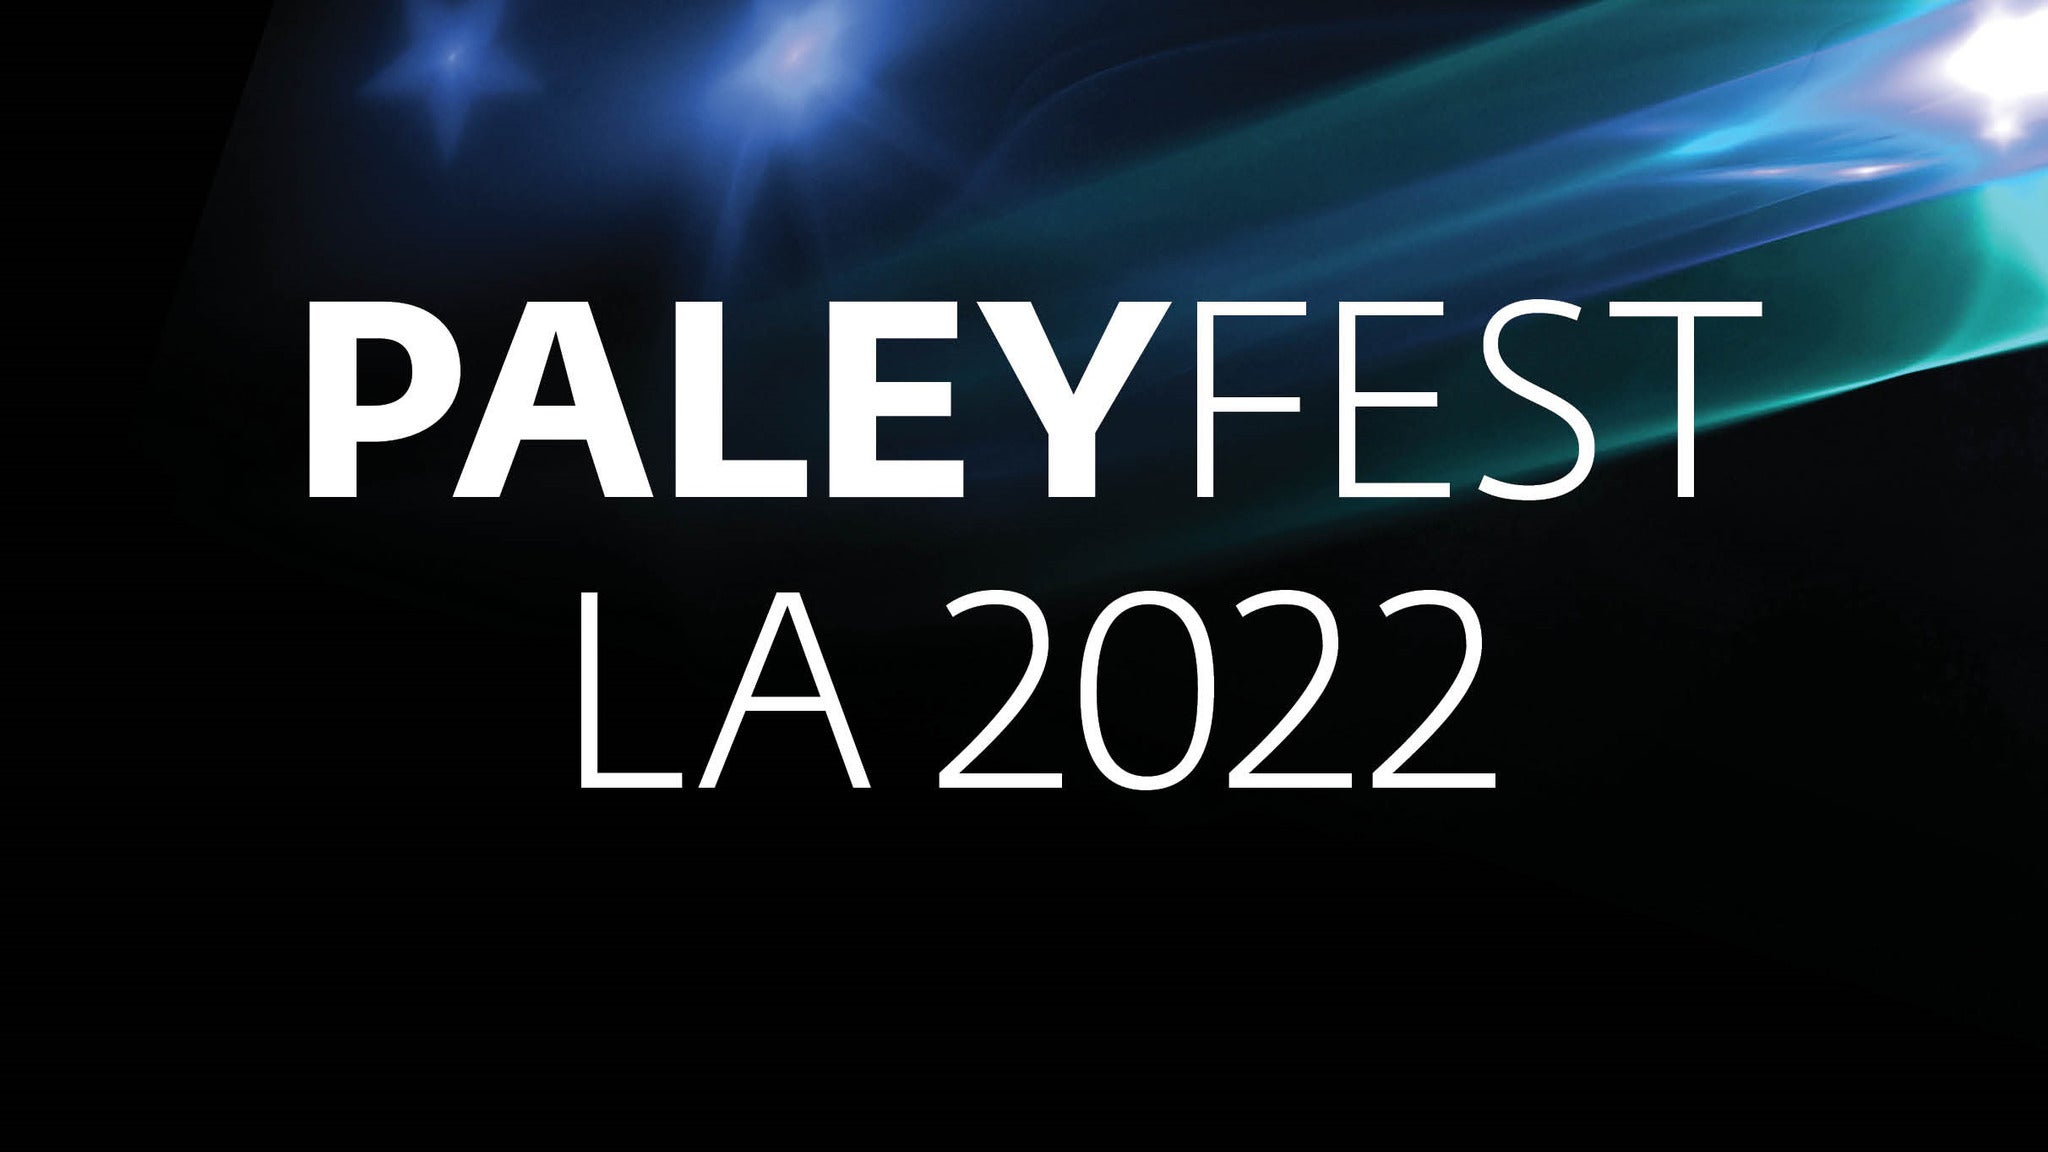 PaleyFest: VIP Showrunner All Events Pass in Hollywood promo photo for Paley Partner / Patron on sale presale offer code